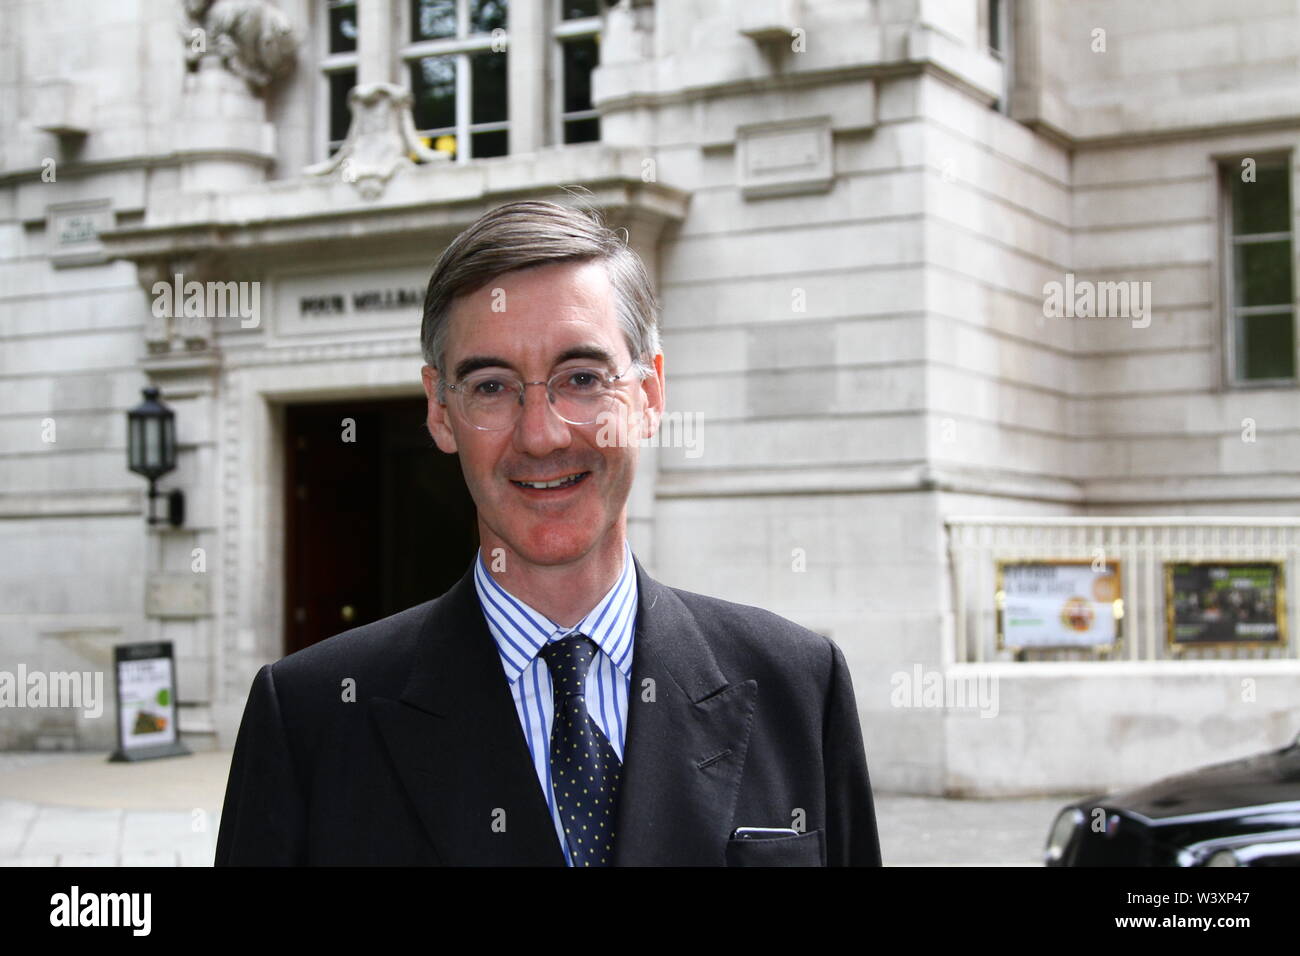 JACOB REES-MOGG MP PICTURED IN THE CITY OF WESTMINSTER ON 17TH JULY 2019. BRITISH POLITICIANS. CONSERVATIVE PARTY MPS. EUROPEAN RESEARCH GROUP. BREXIT. ERG. LEAVE MEANS LEAVE. NO DEAL NO PROBLEM. FAMOUS POLITICIANS. RUSSELL MOORE PORTFOLIO PAGE. Stock Photo